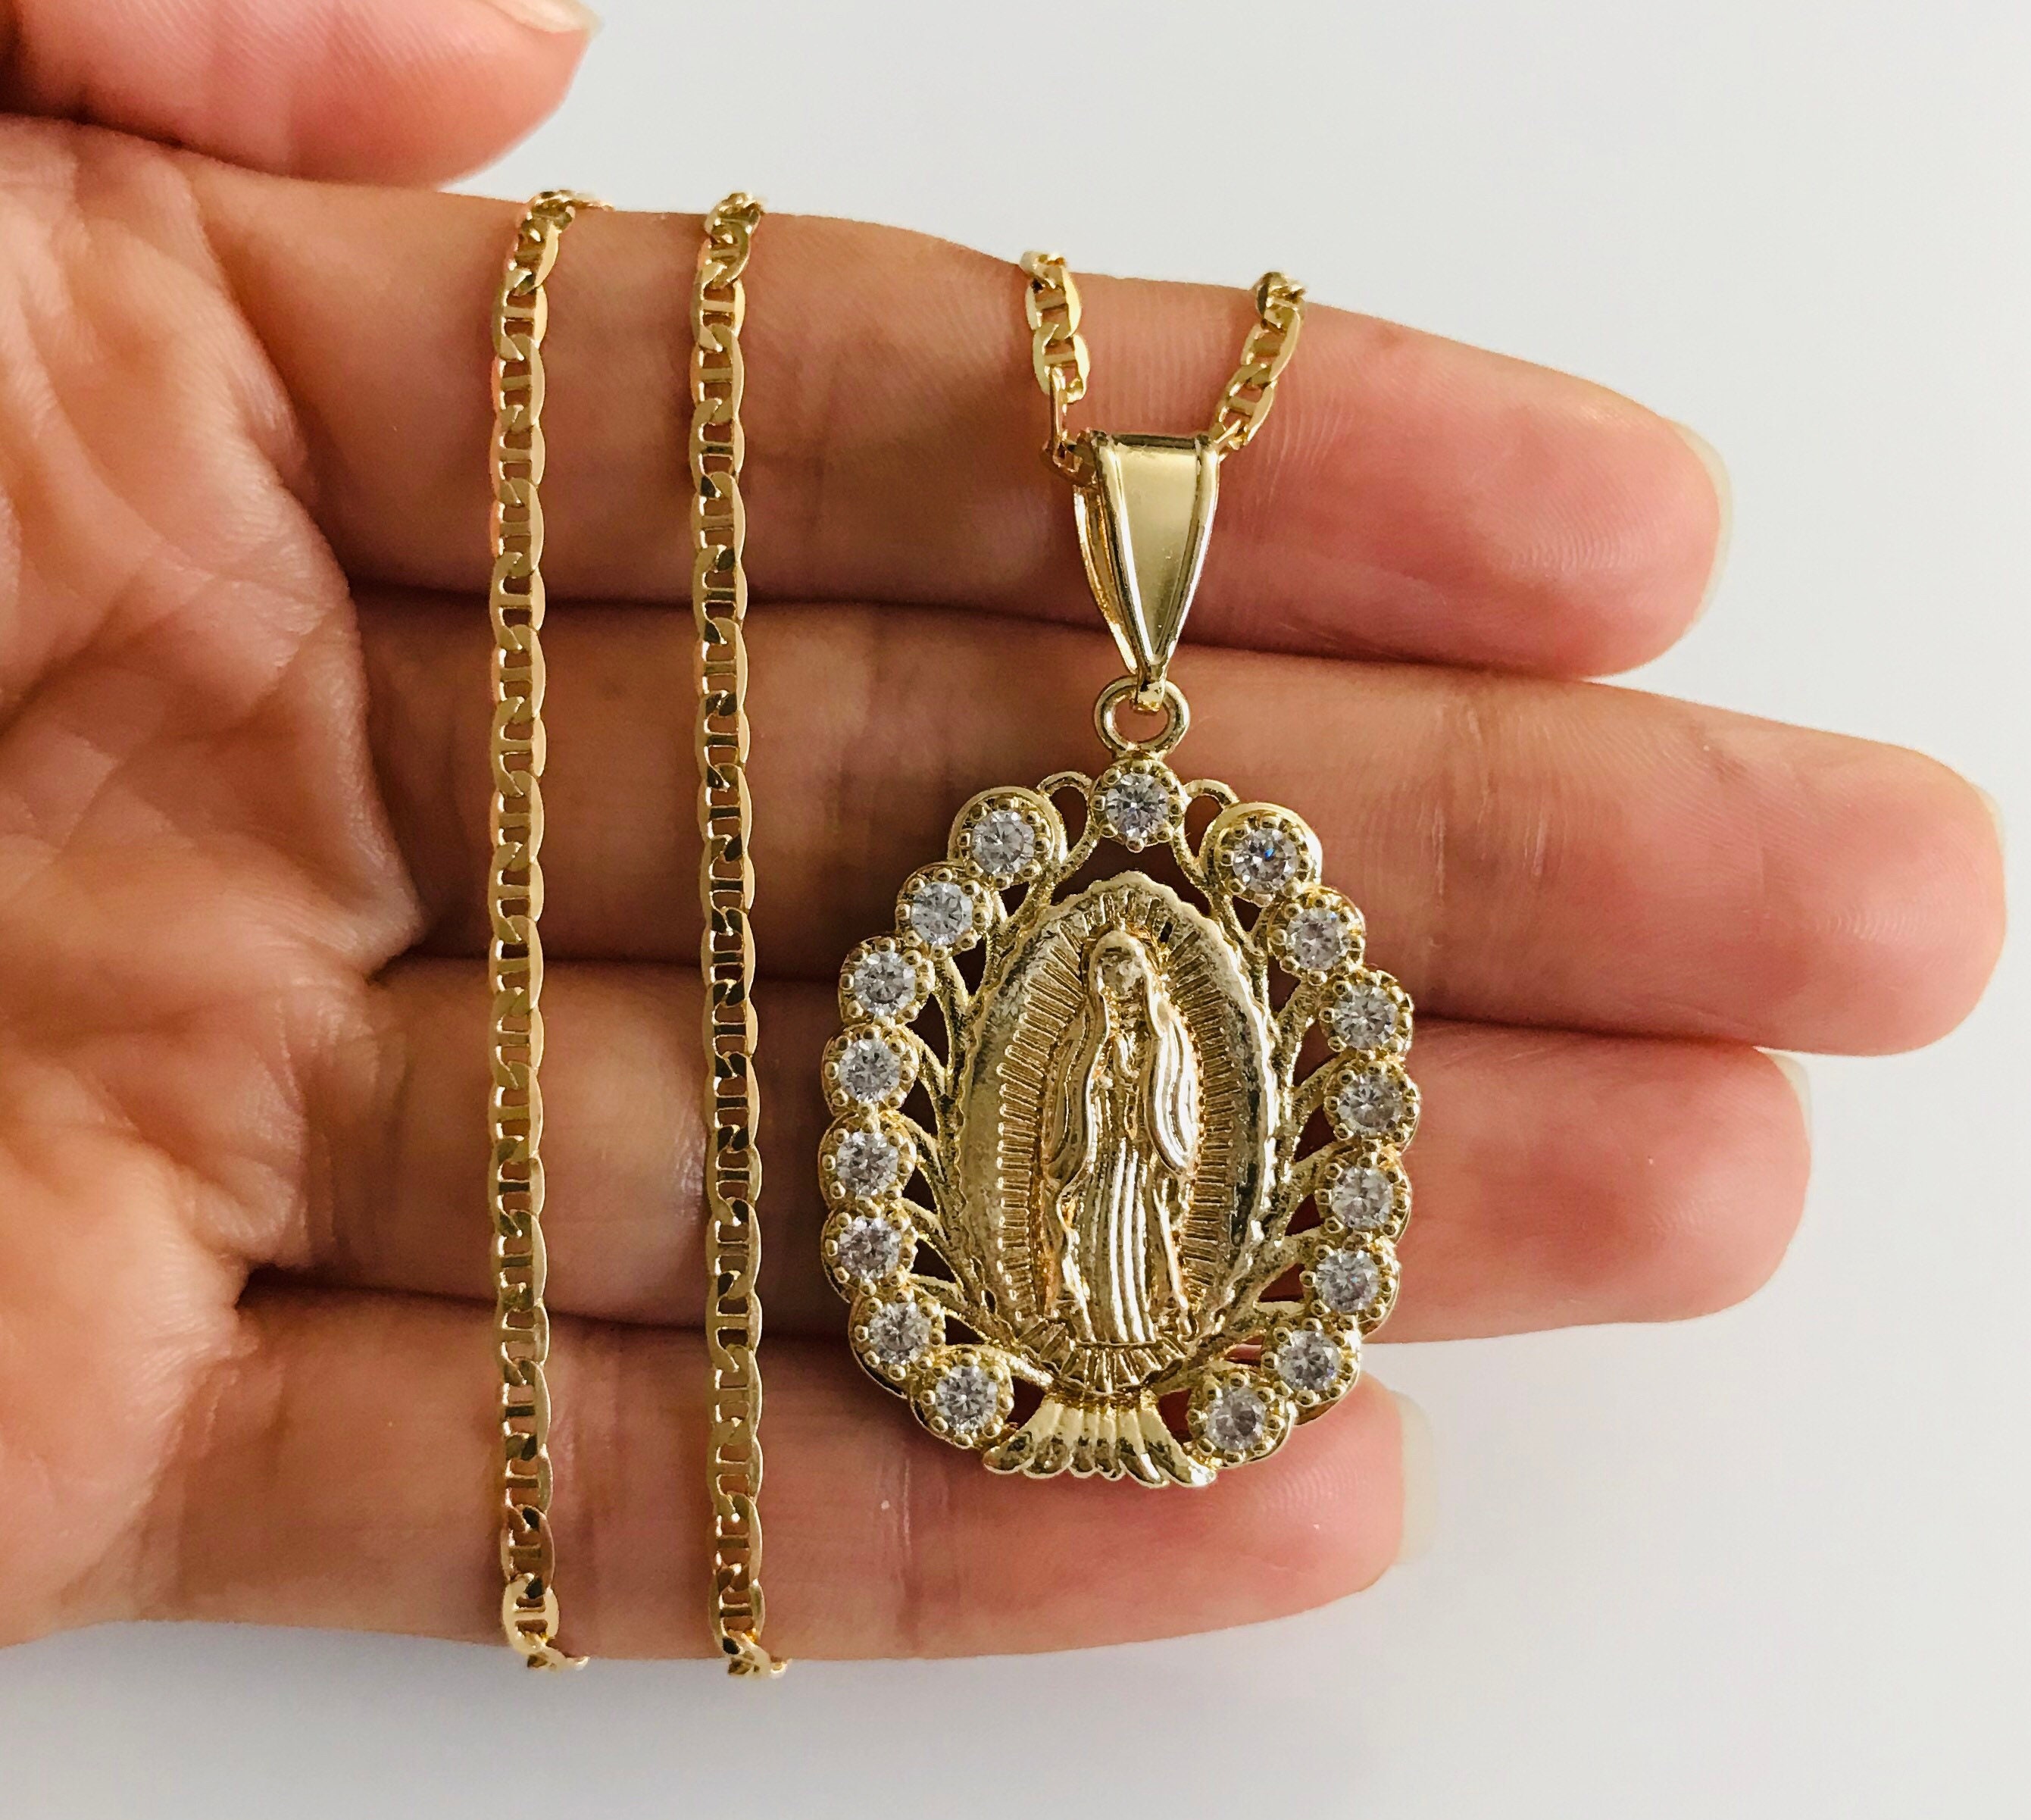 18k Gold Filled Virgin Mary Necklace, Virgin Mary Necklace, Virgen Maria  Collar, Gold Viegin Necklace, Catholic Necklace, Dainty Necklace - Etsy | Virgin  mary necklace, Dream jewelry, Jewelry fashion trends